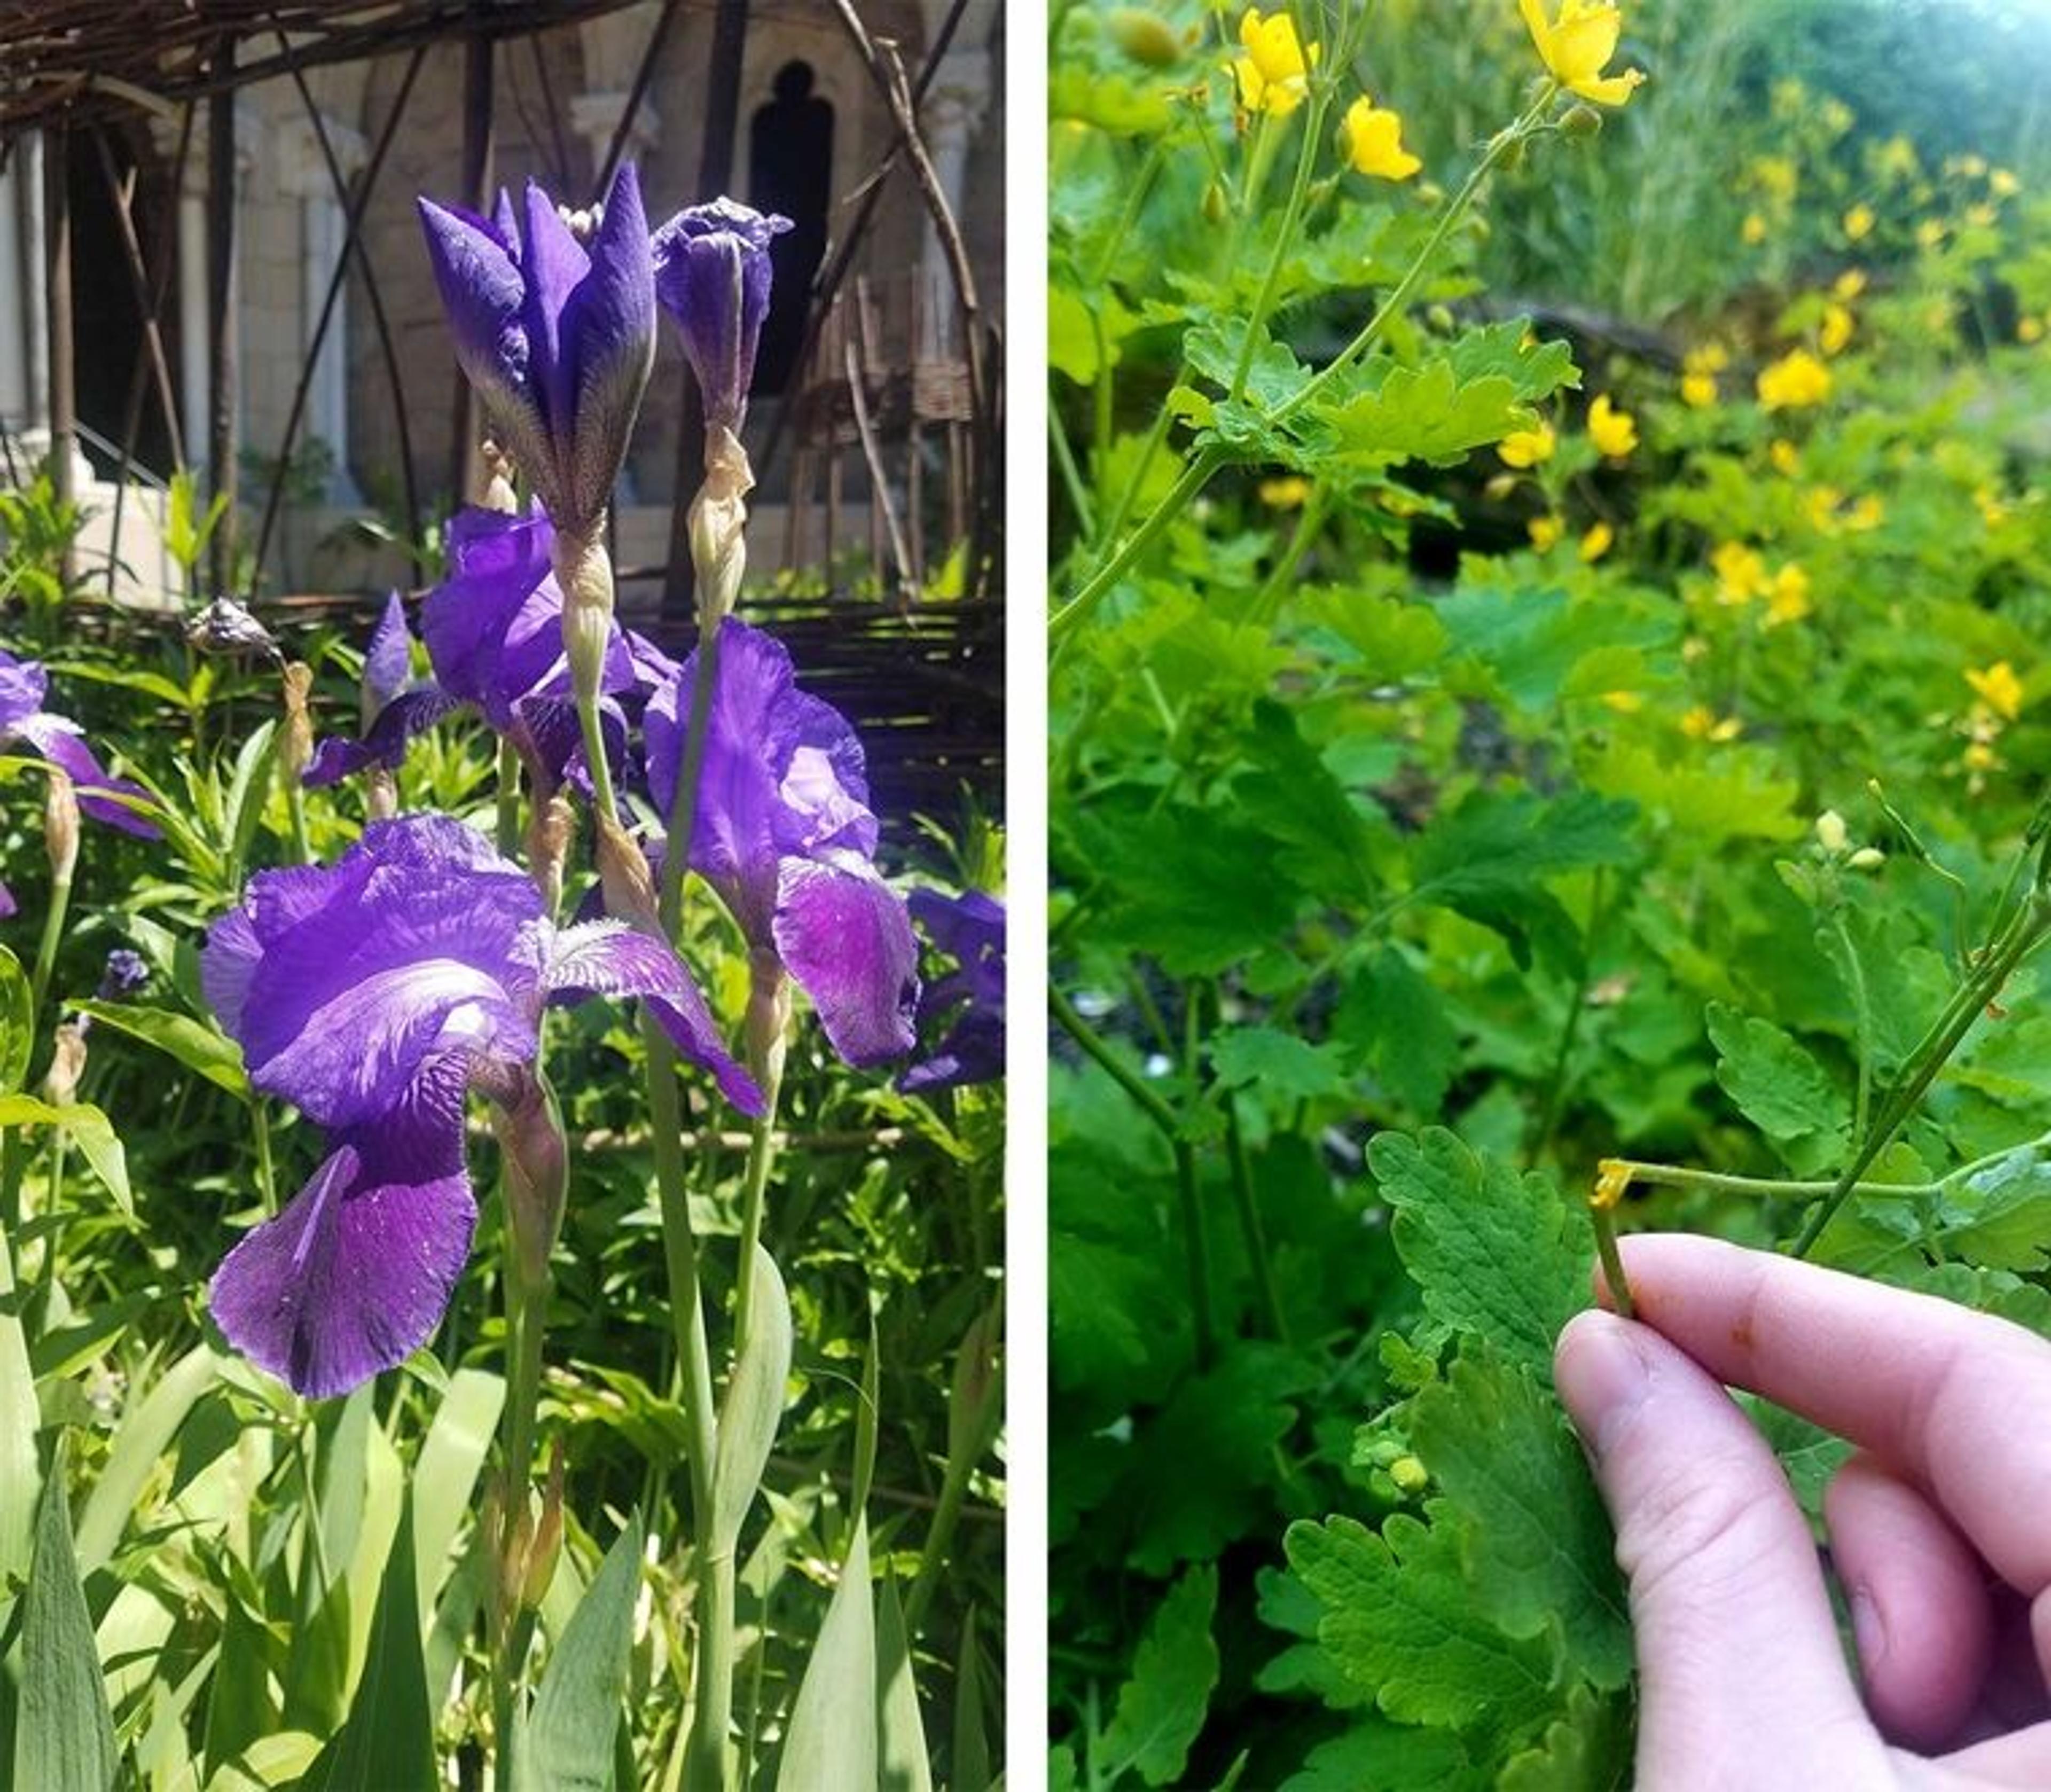 Left: the flower of a purple iris. Right: a green, broken stem with yellow sap coming out.